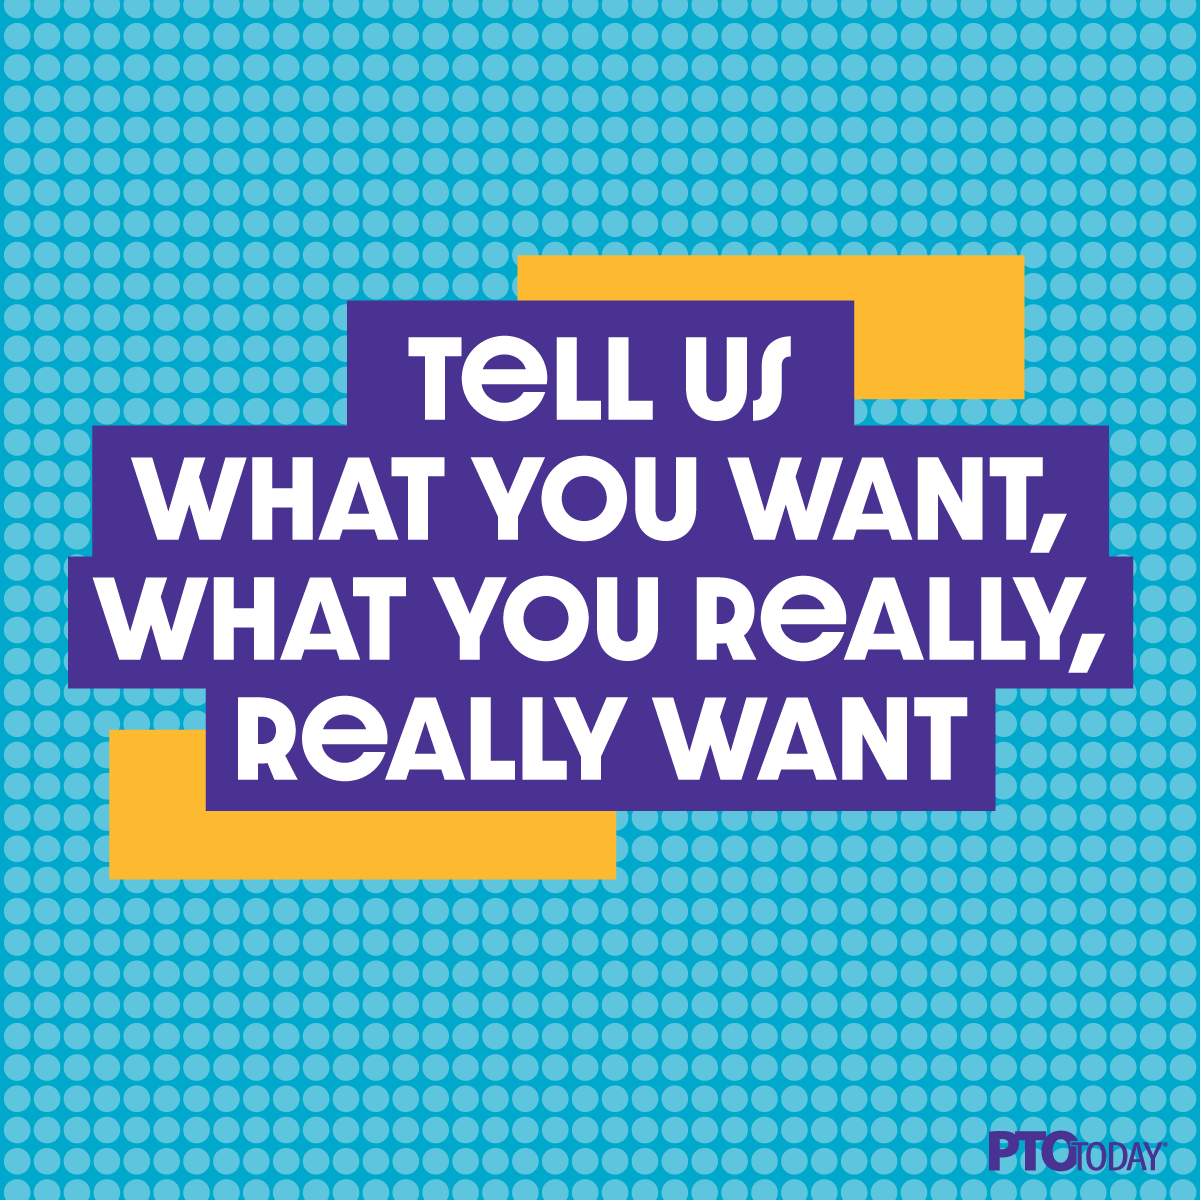 Share Your Thoughts: What Are Your Wants and Needs?